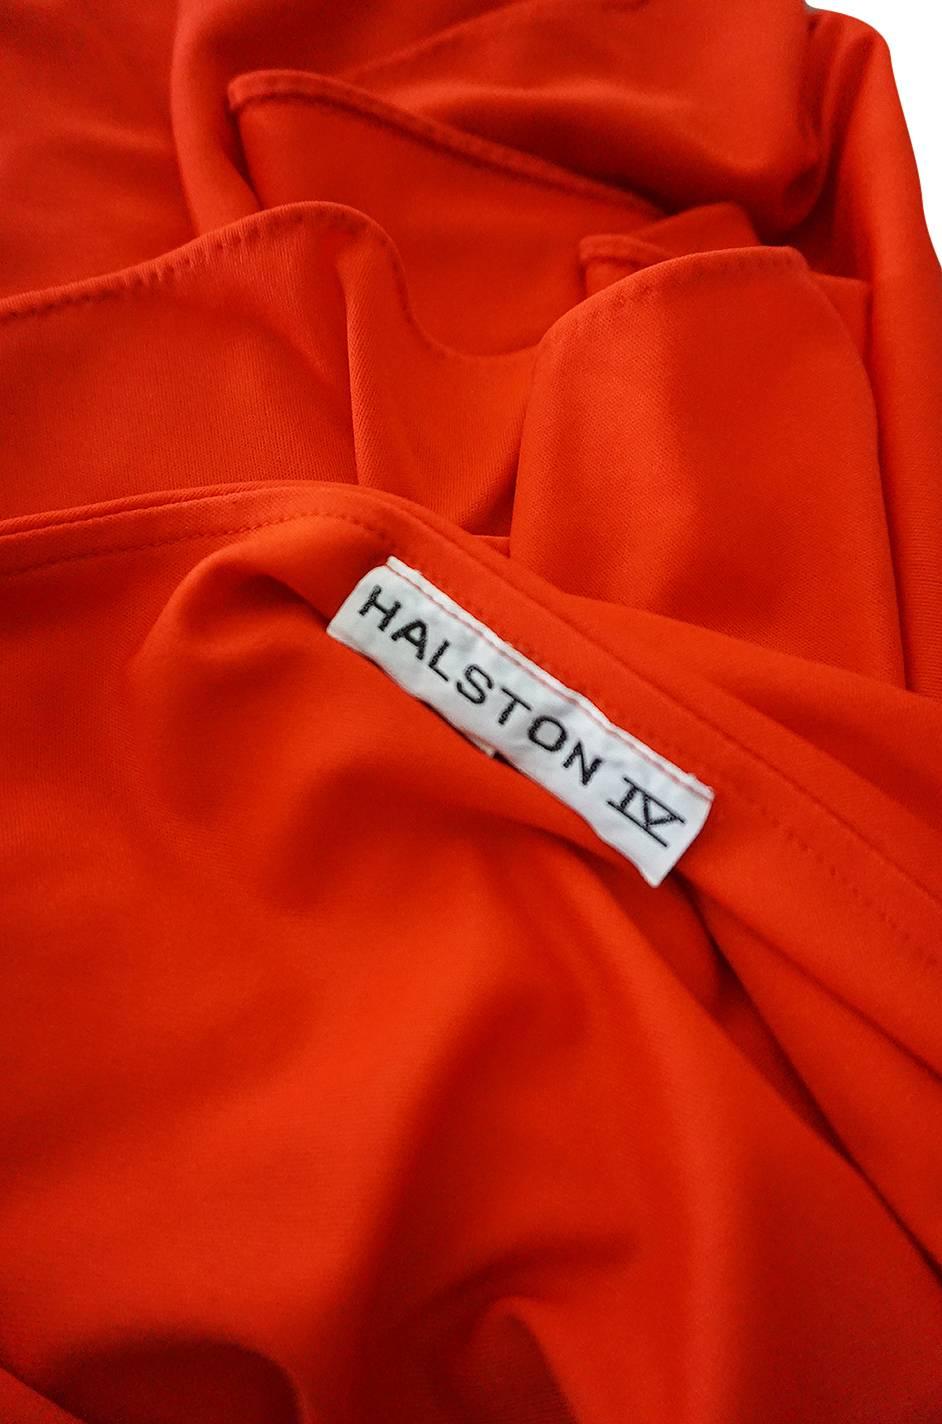 1978 Red Halston One Shoulder Jersey Dress As Seen on Kate Moss 3